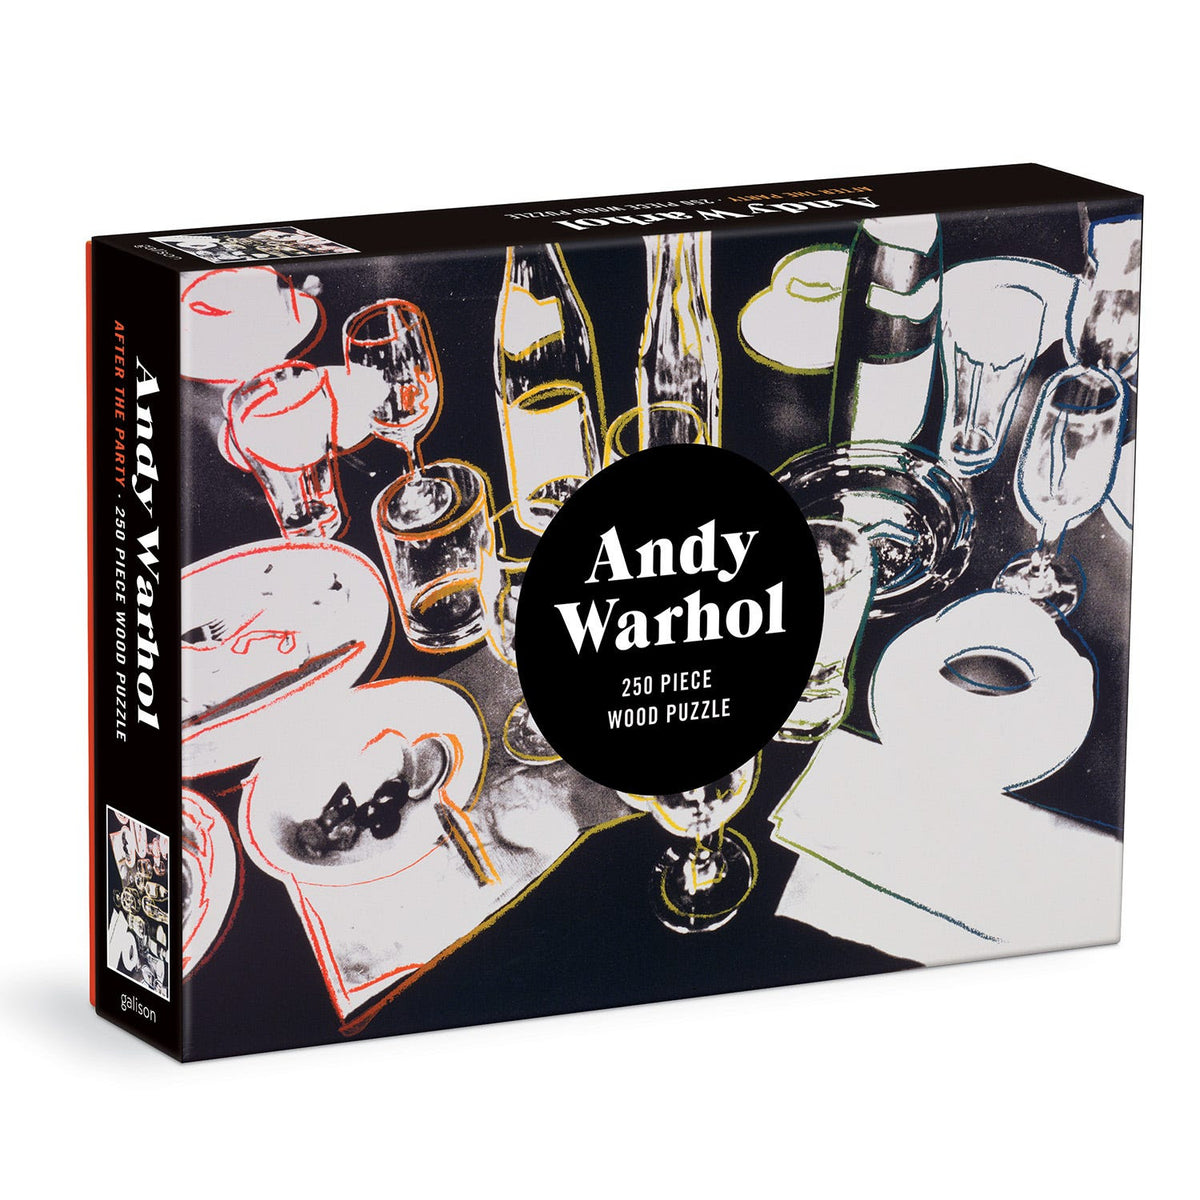 Andy Warhol After the Party 250 pc Wood Puzzle